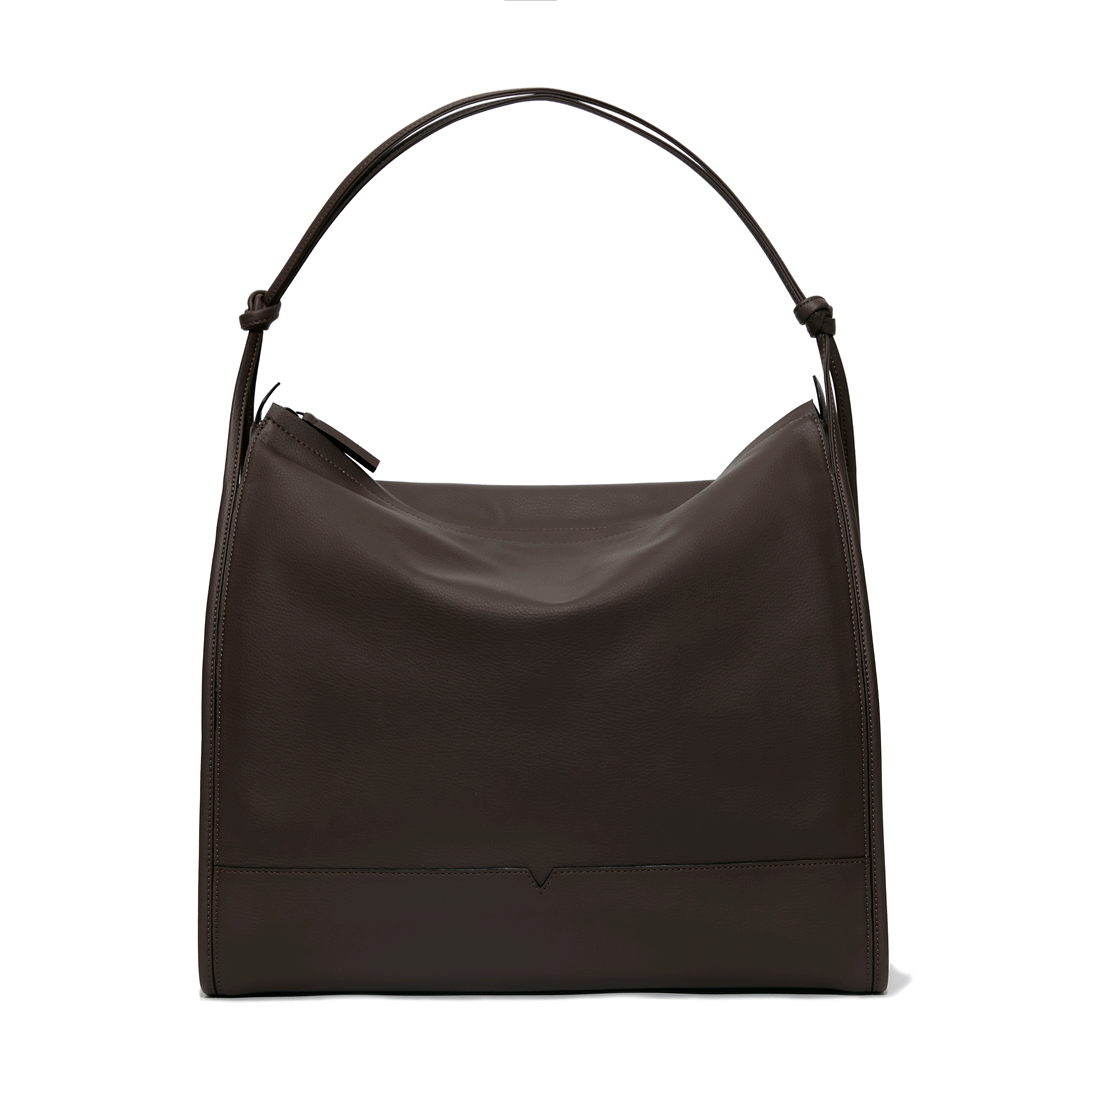 The Shoulder Bag in Banbū Leather in Taupe image 10